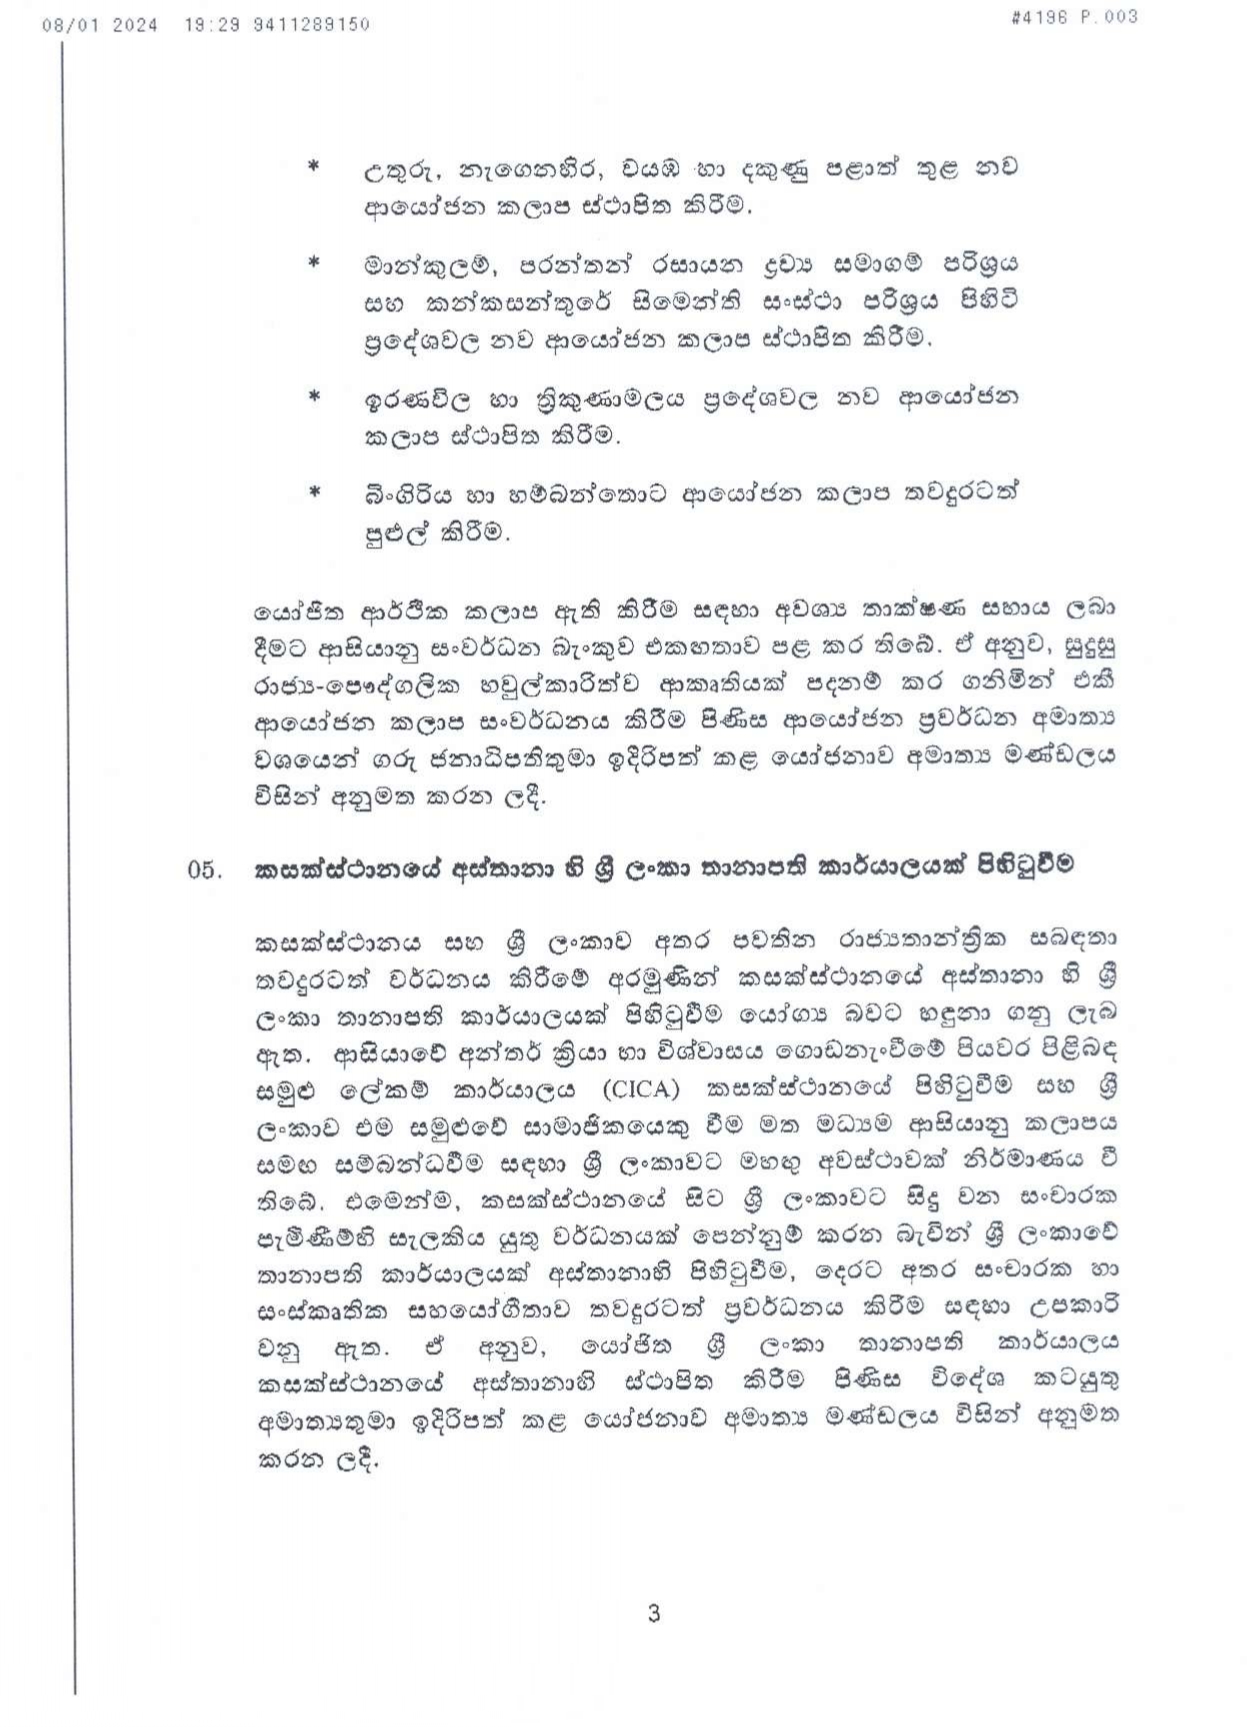 Cabinet Decision on 08.01.2024 1 page 0003